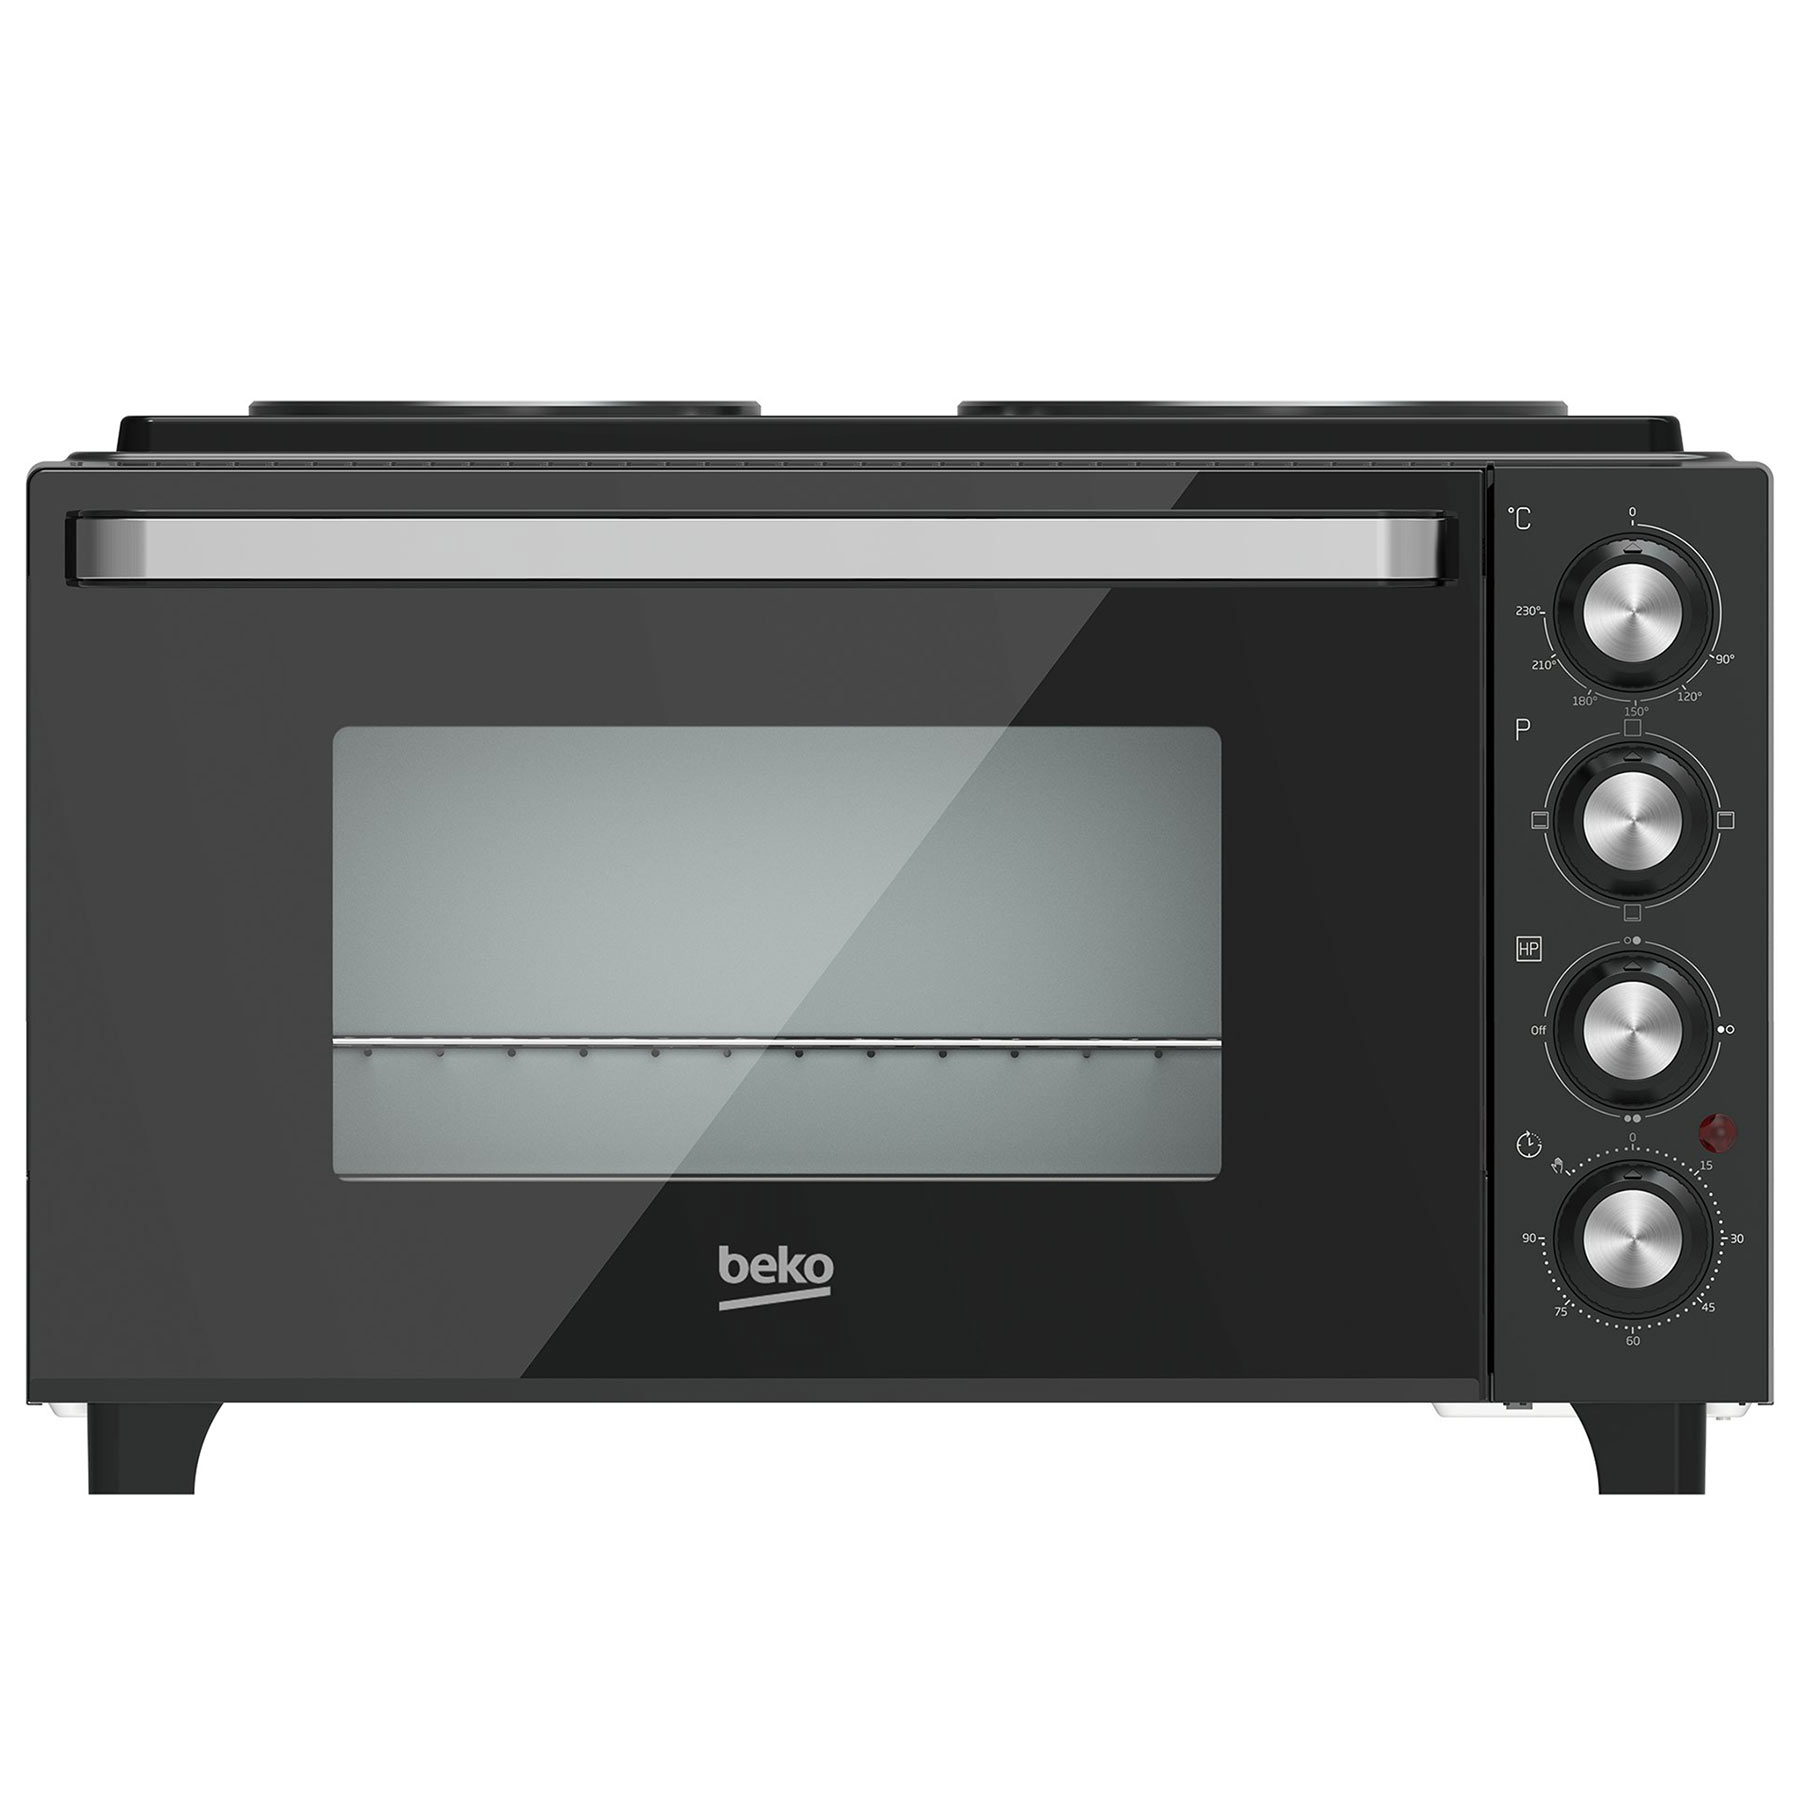 Beko MSH30B 30L Table Top Mini Oven with Hot Plates Black